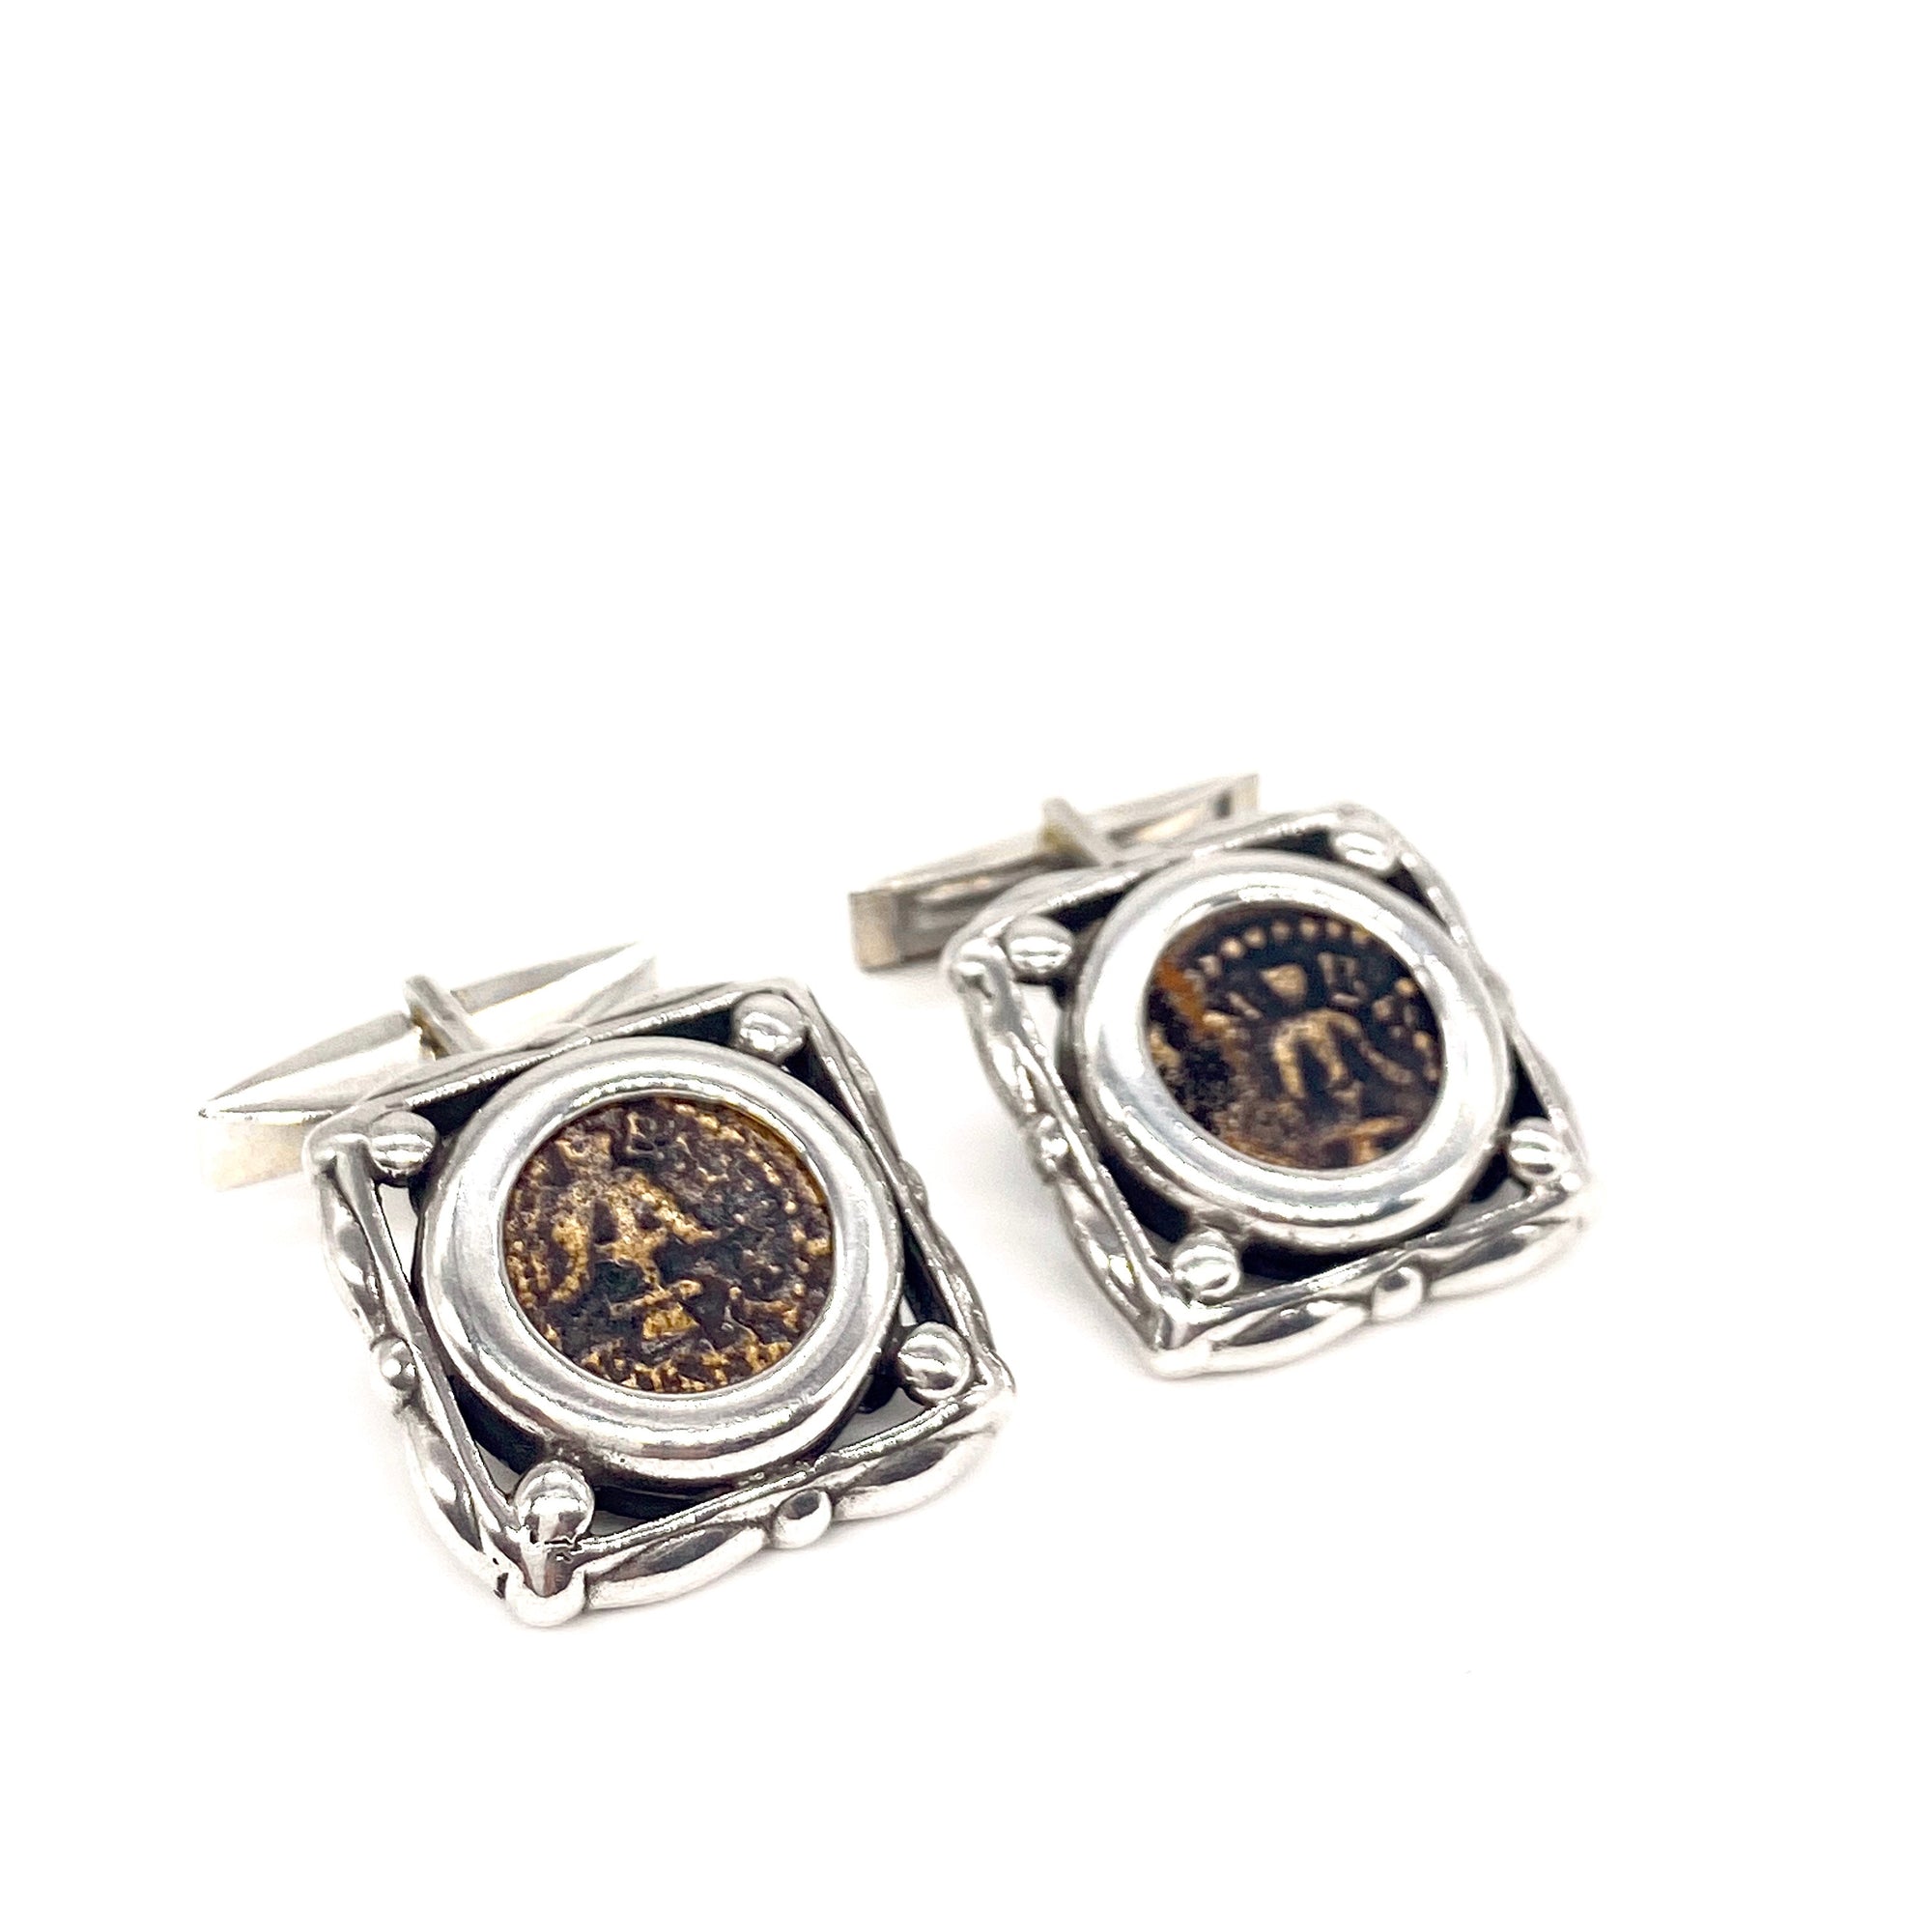 Widows Mite - Cuff Links in Square Sterling Silver Mount